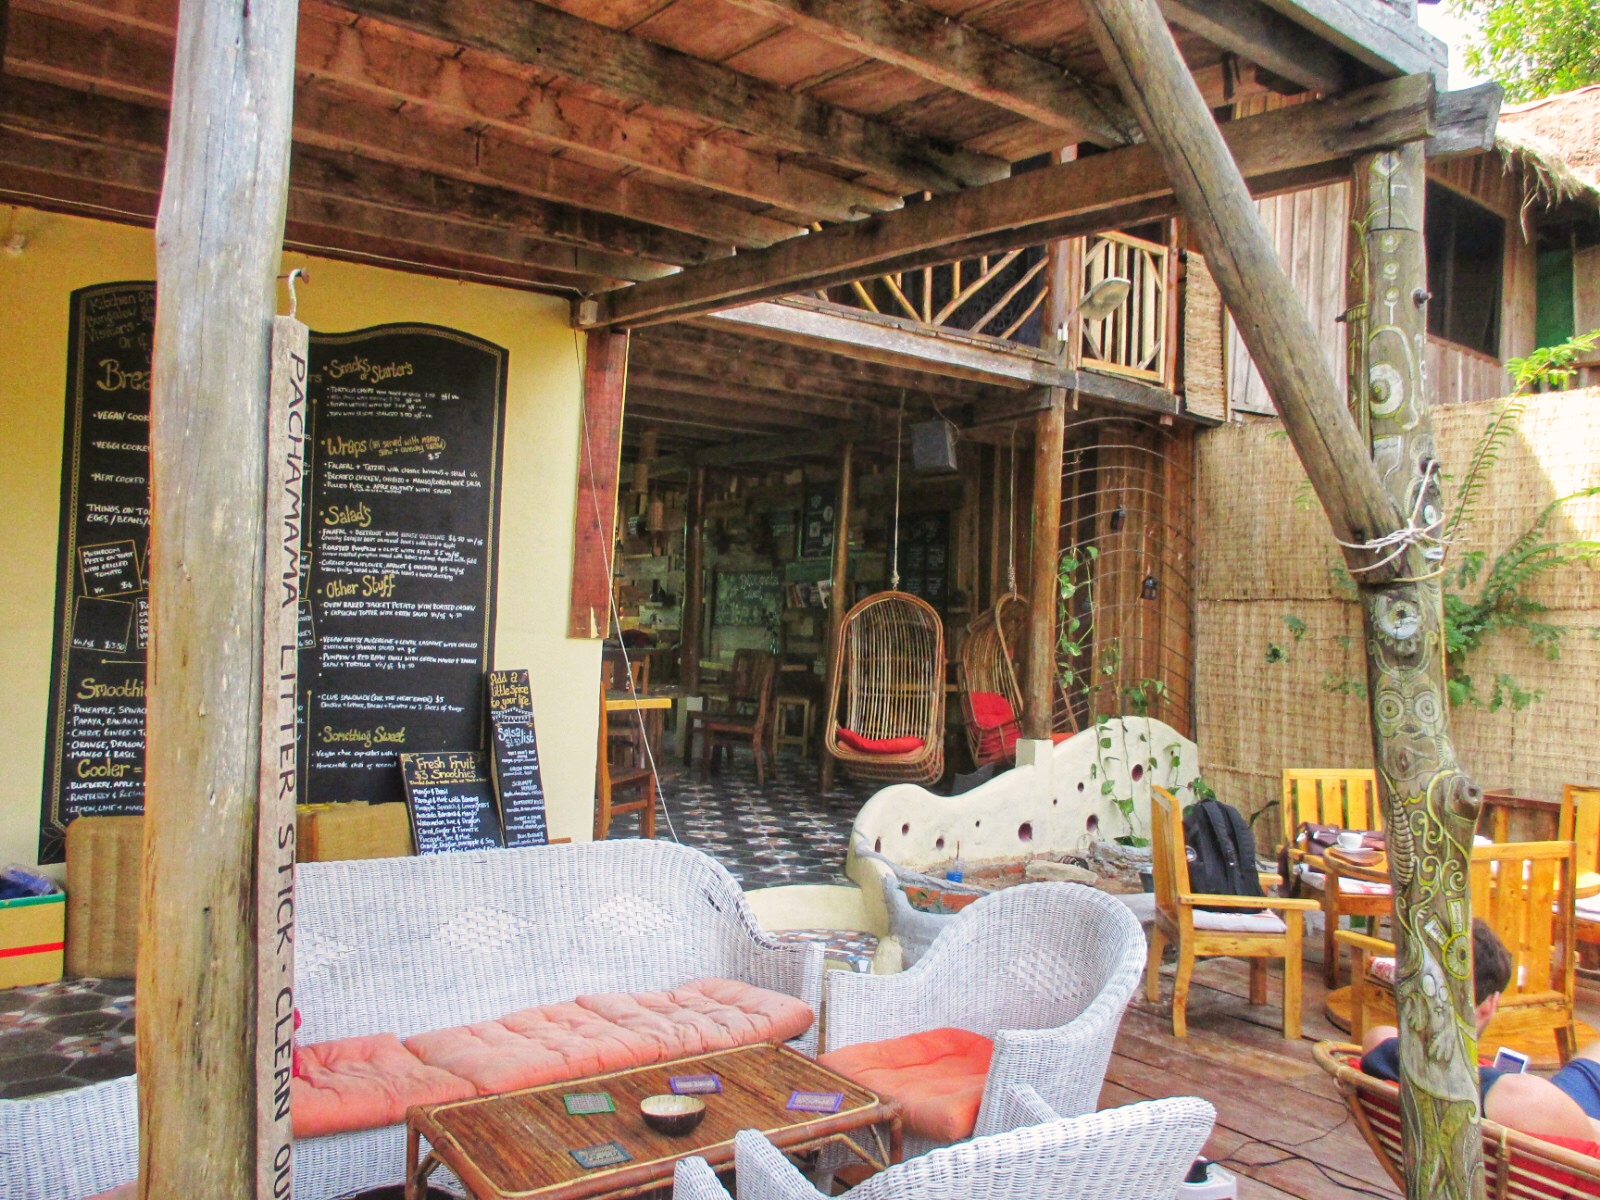 Ambience at a Sihanoukville restaurant with its wooden structures, greenery and warm decor